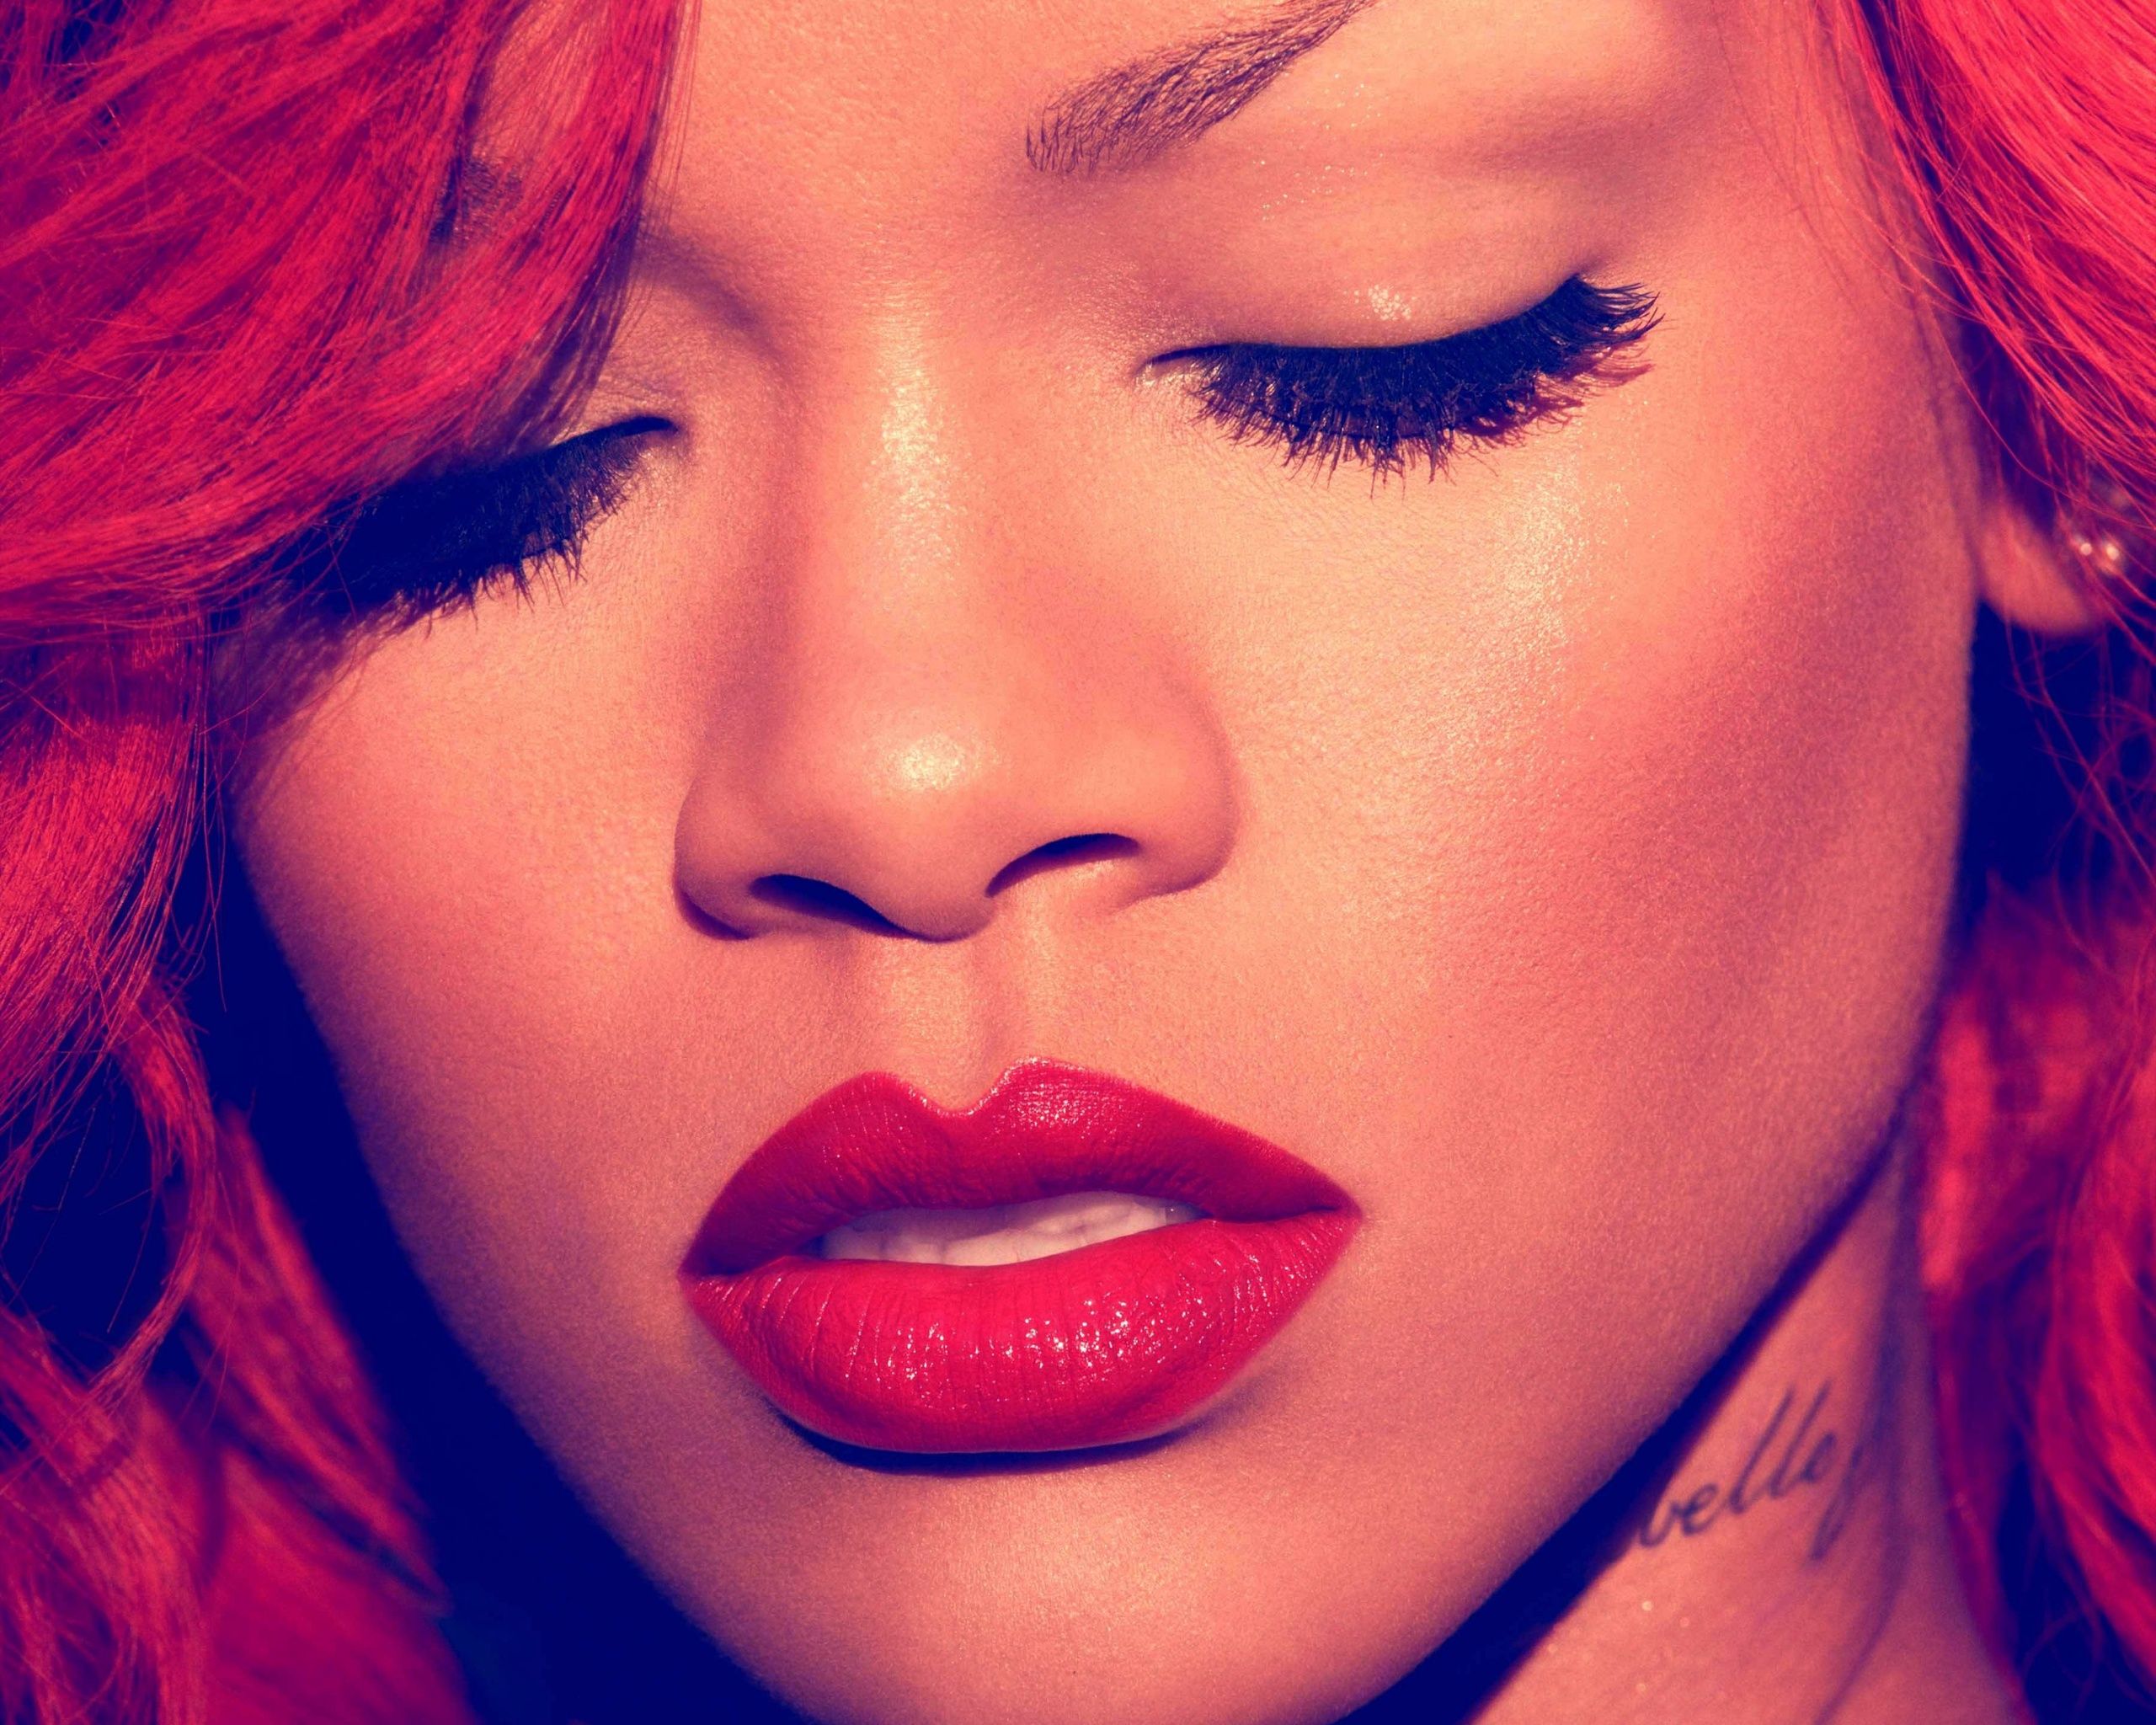 Mobile wallpaper: Rihanna, People, Girls, 46637 download the picture for free